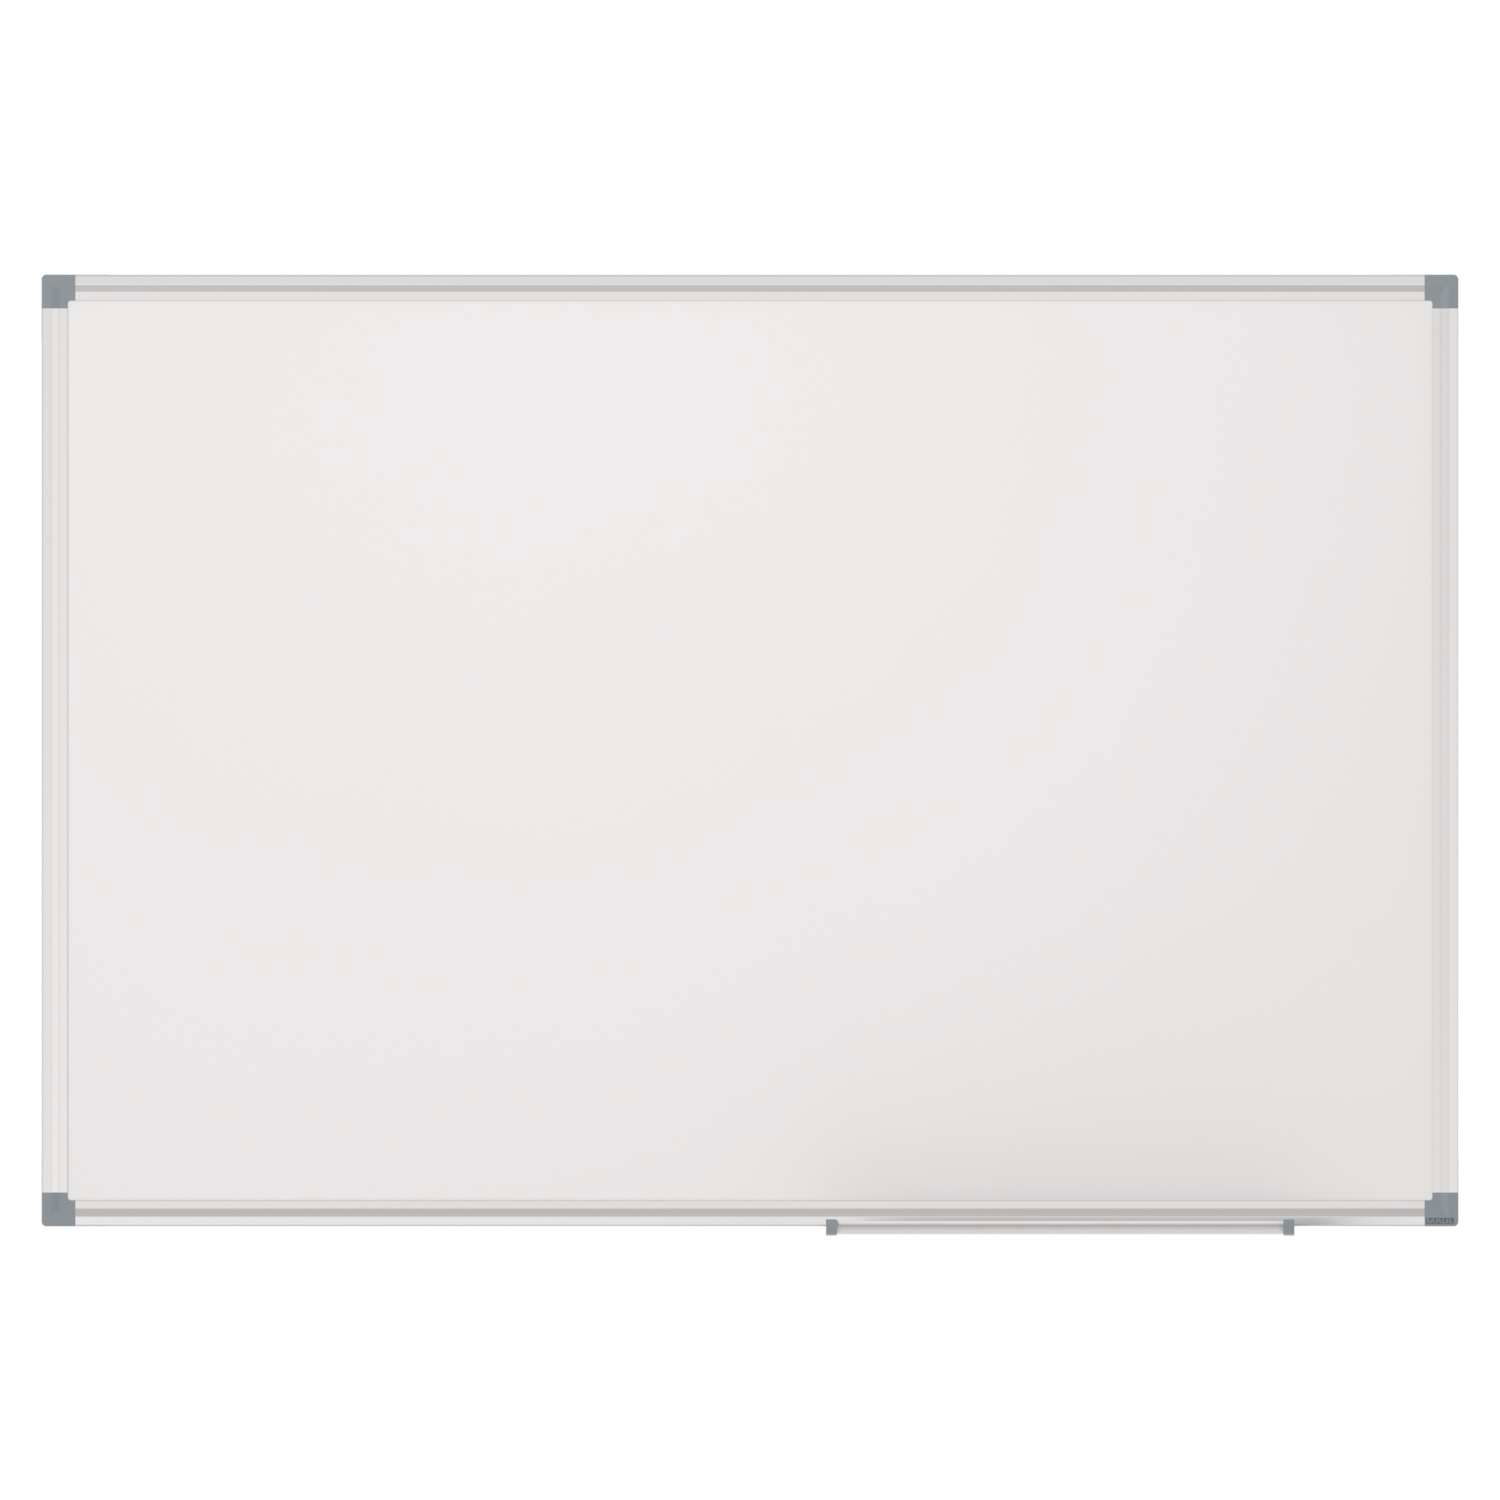 Whiteboard MAULstandard, Emaille, 30x45 cm